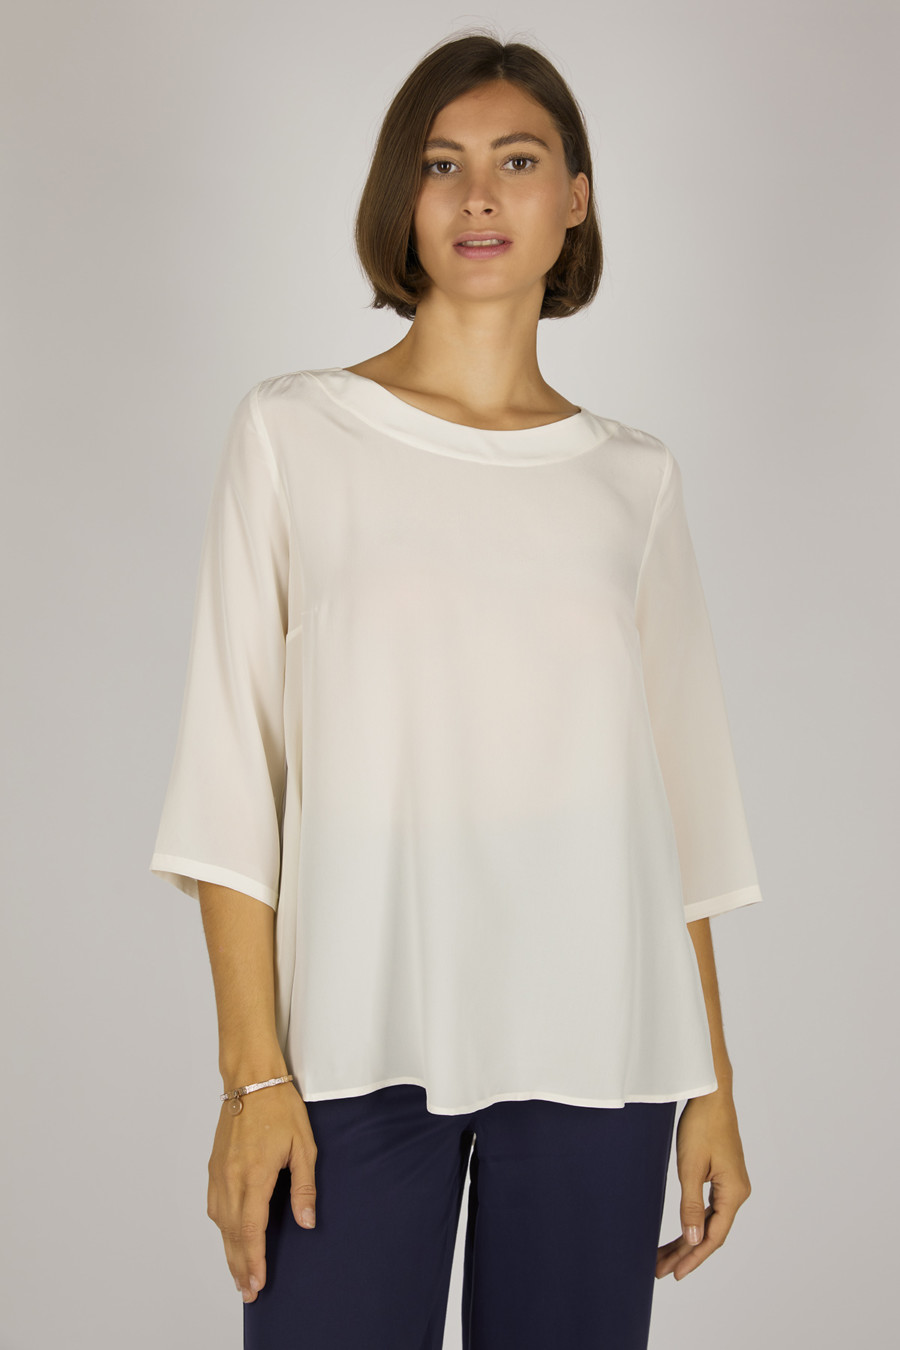 ALISON – Silk Blouse with Back Detail – Color: Cream